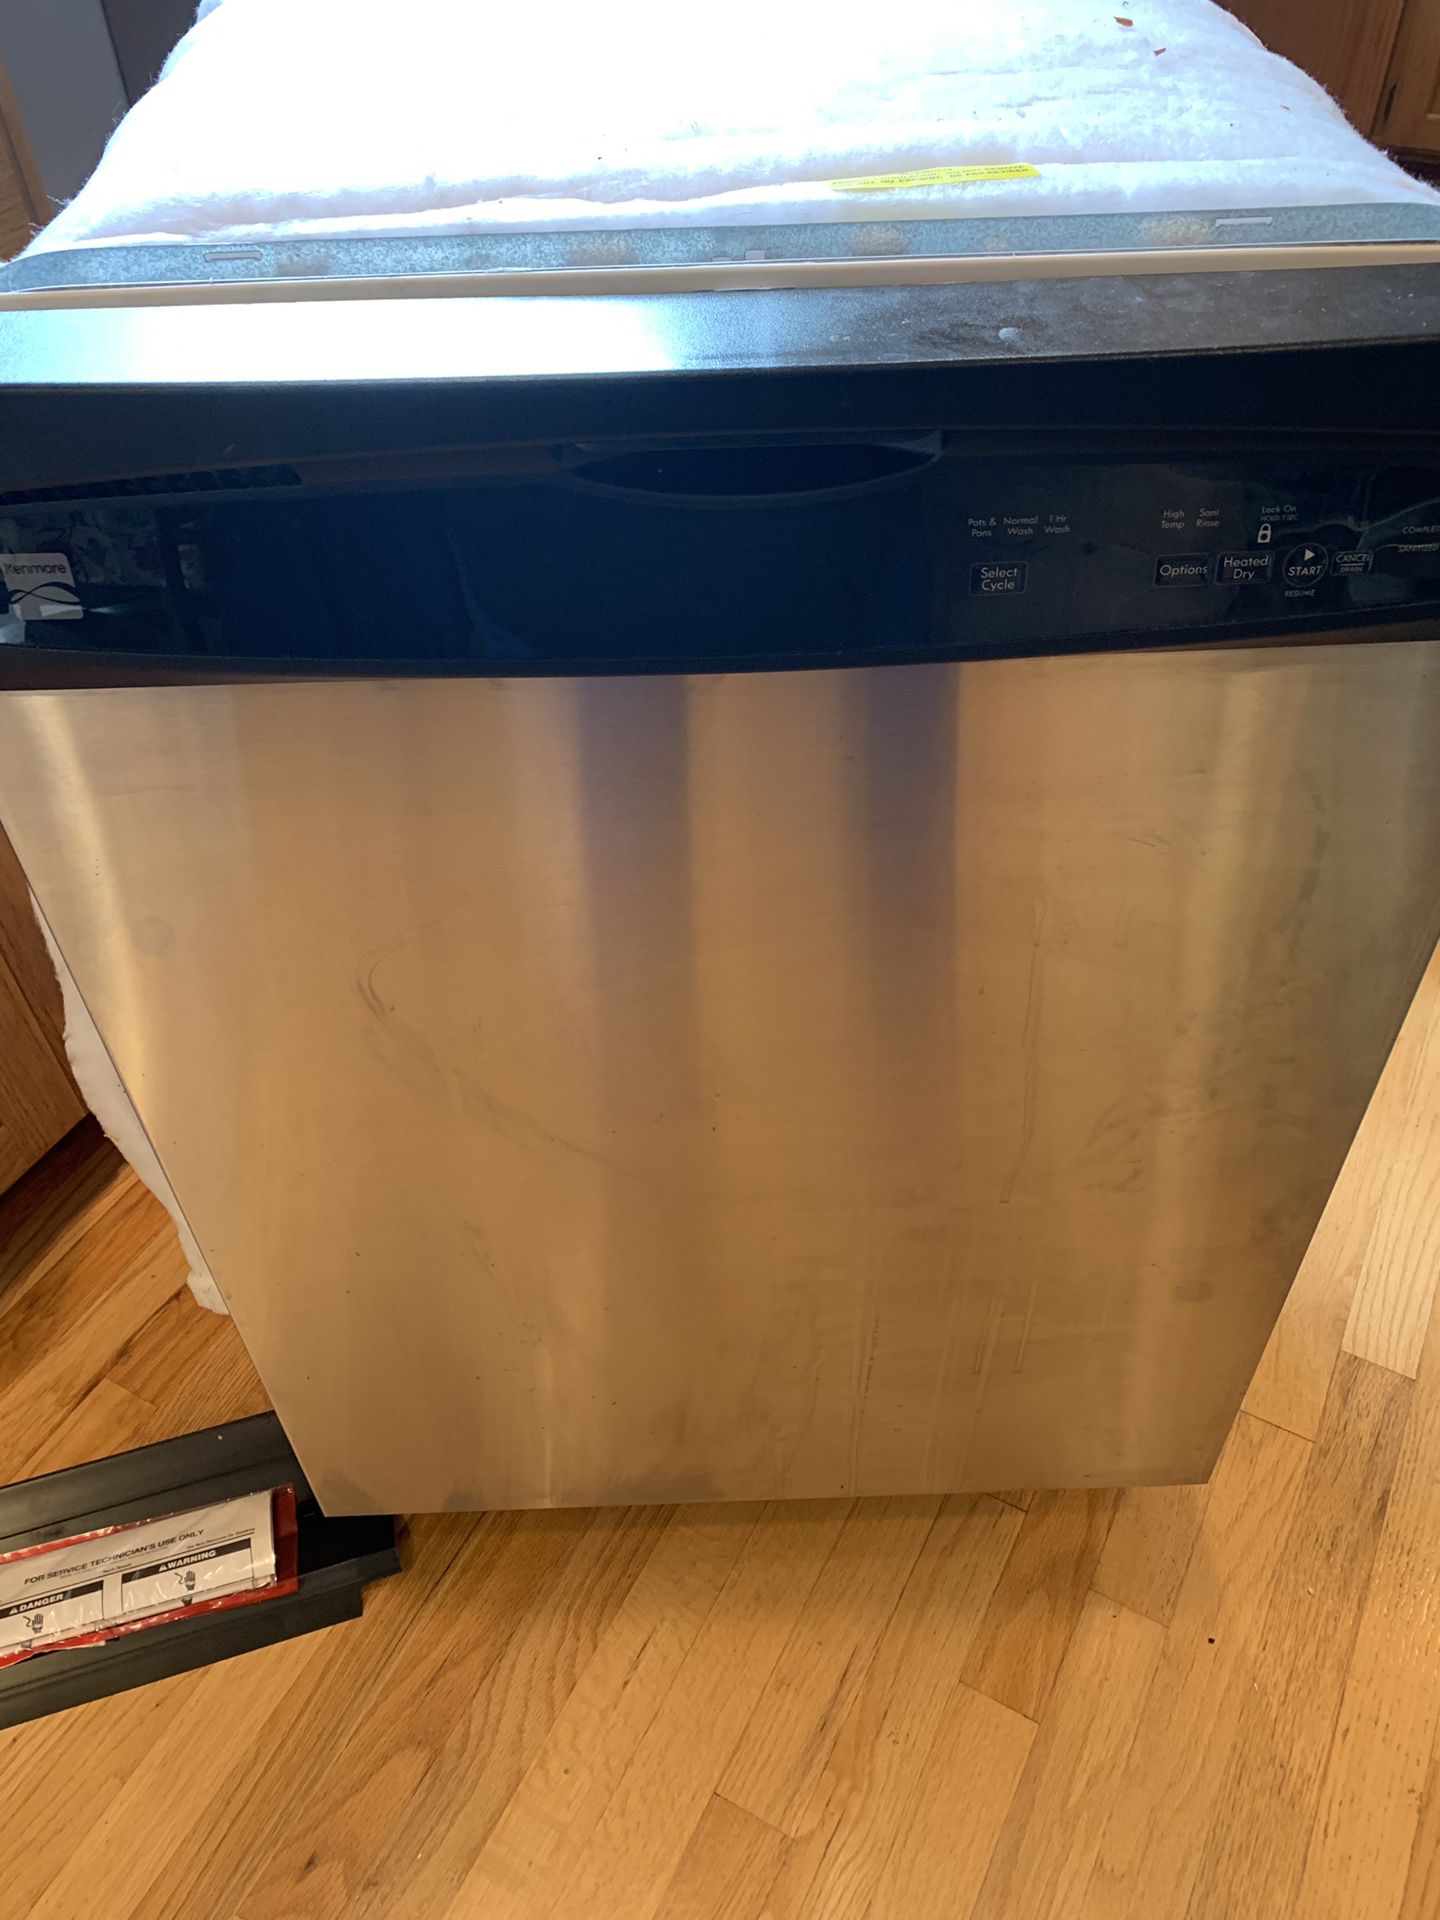 Kenmore stainless steel dishwasher approx 4 yrs old